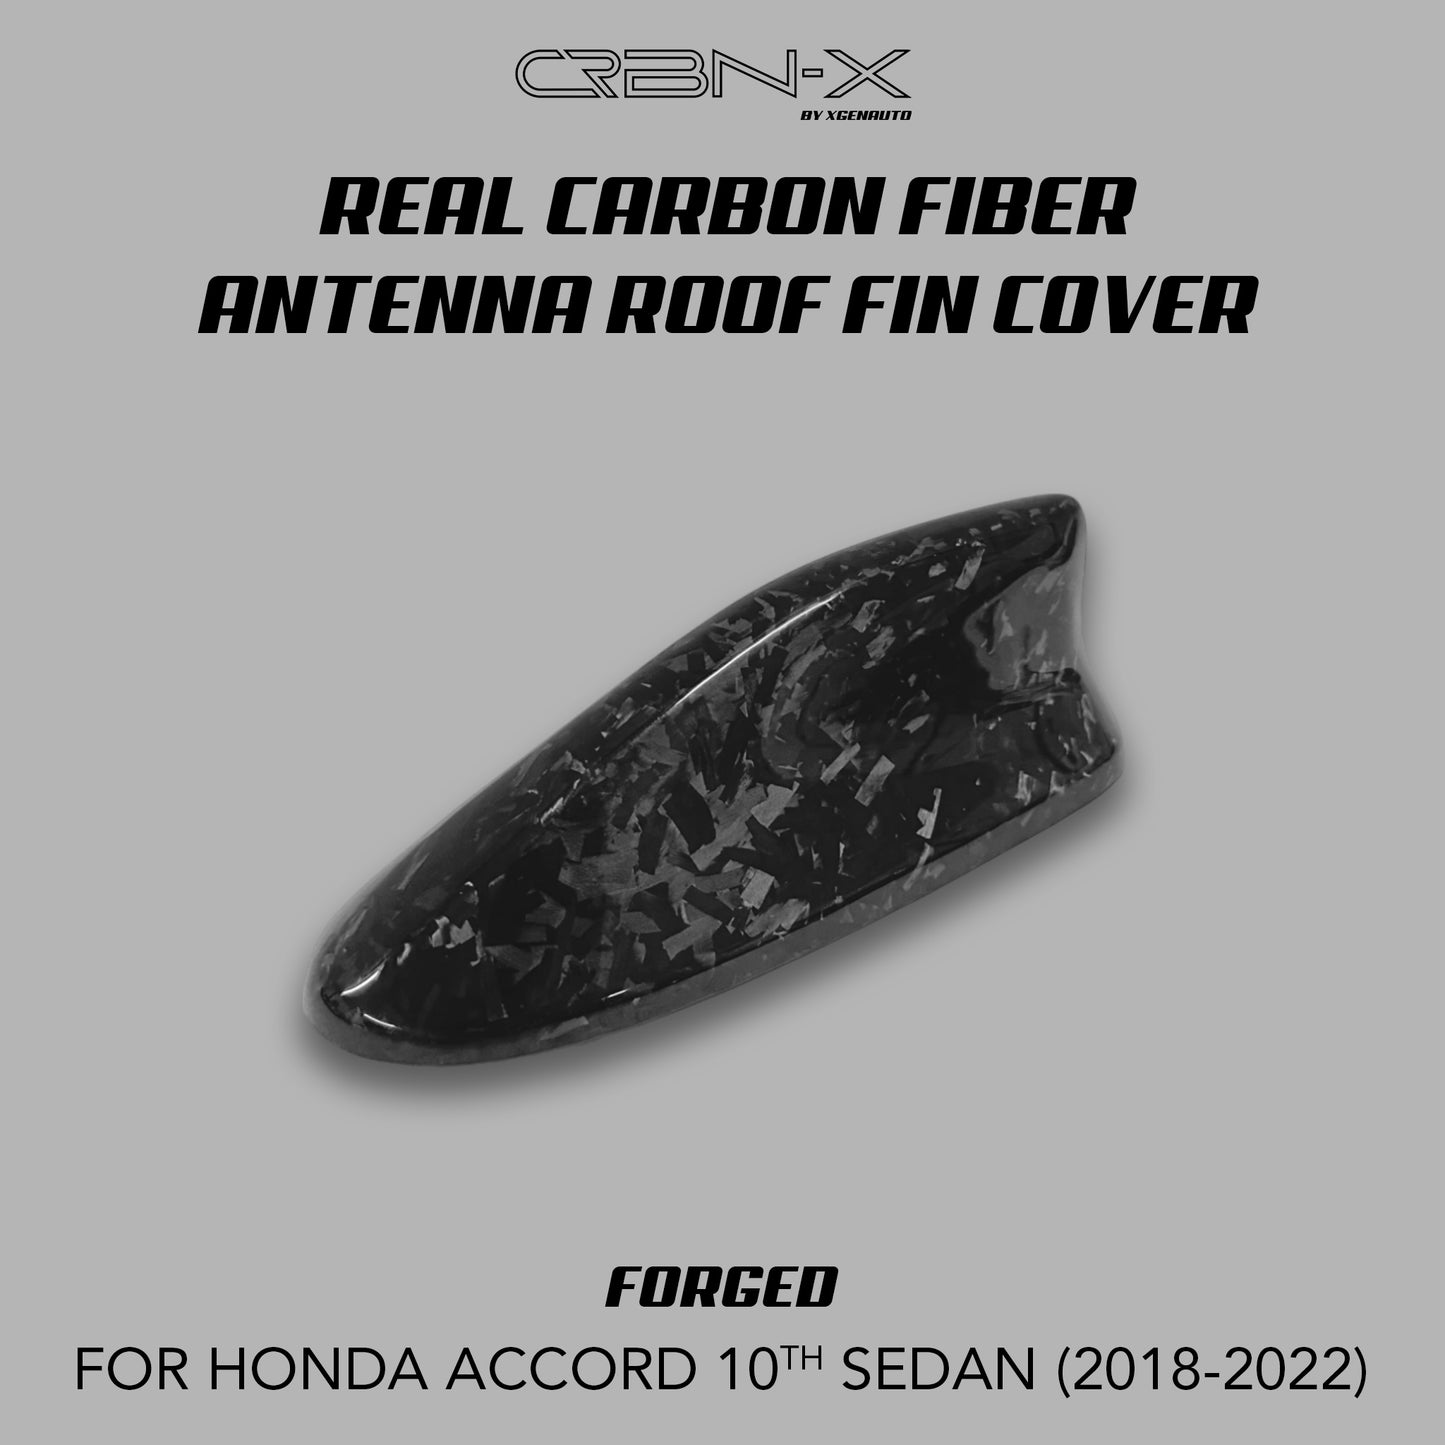 [ACCORD X] REAL CARBON FIBER ANTENNA ROOF FIN COVER